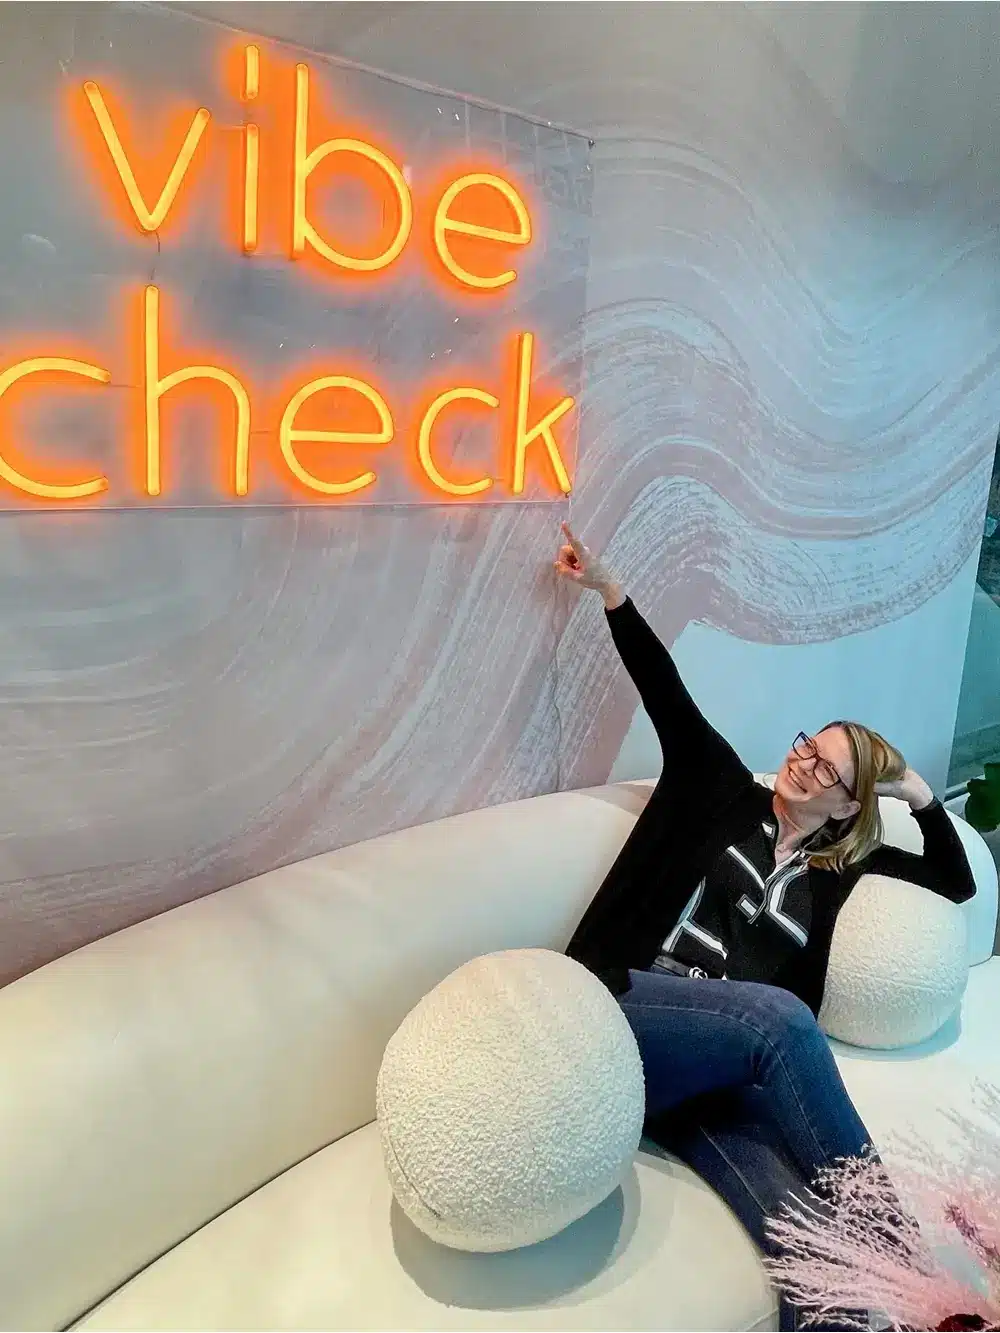 Picture of Birgit Anich - CEO seating on and white sofa with round shaped pillow on her both sides and she is smiling one of her hand pointing to the wall decorative display text "vibe check"